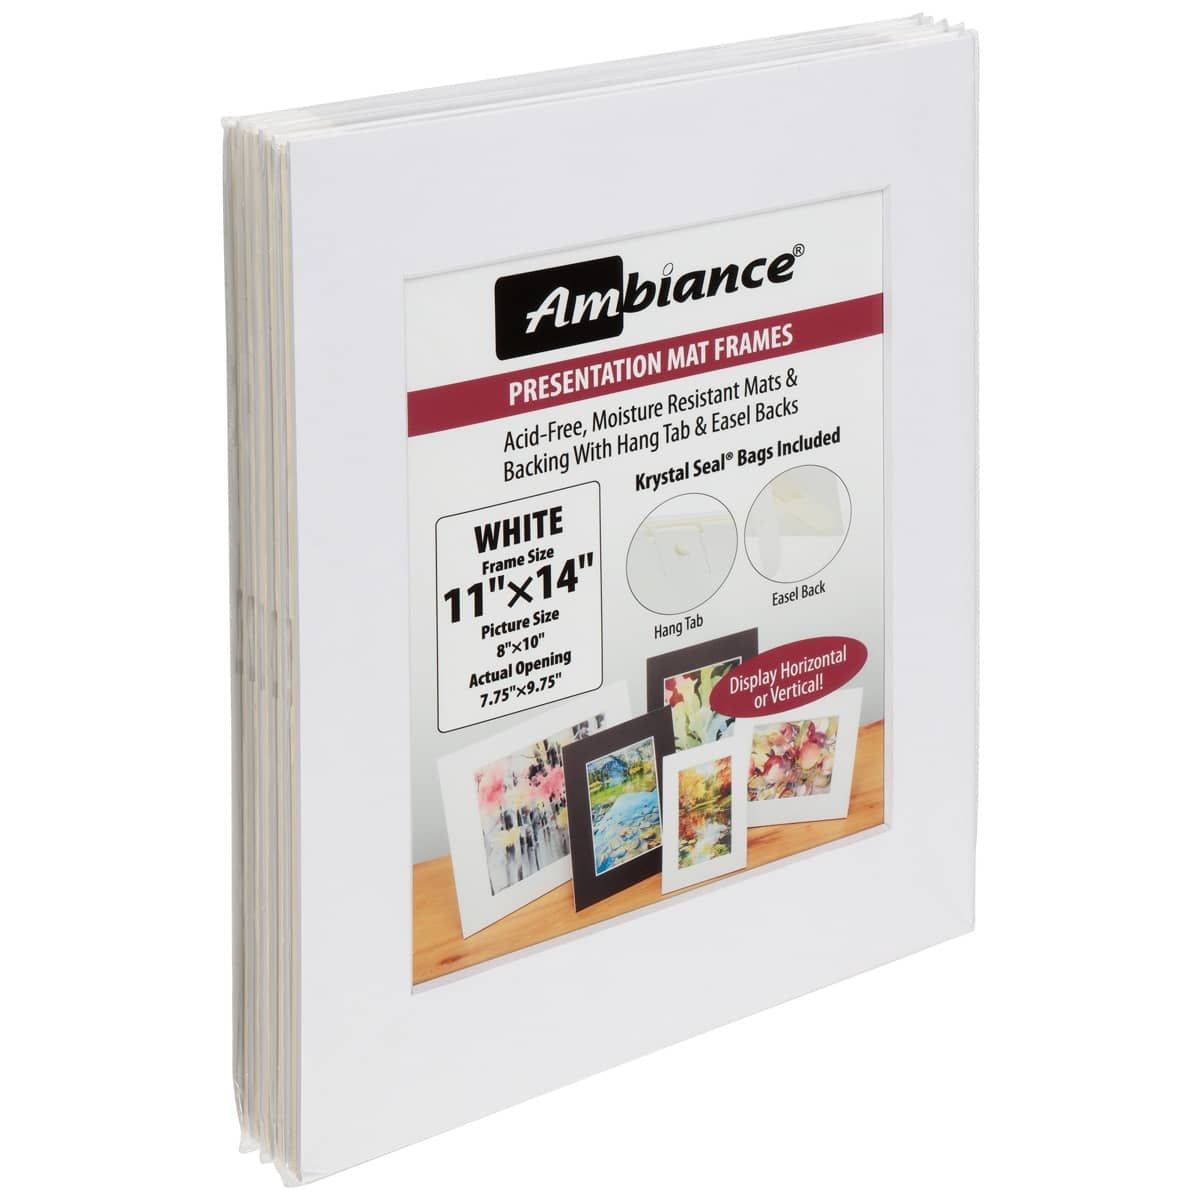 Ambiance 5-Pack Mat Frame 11x14/ 7.75x9.75 Pic Size White